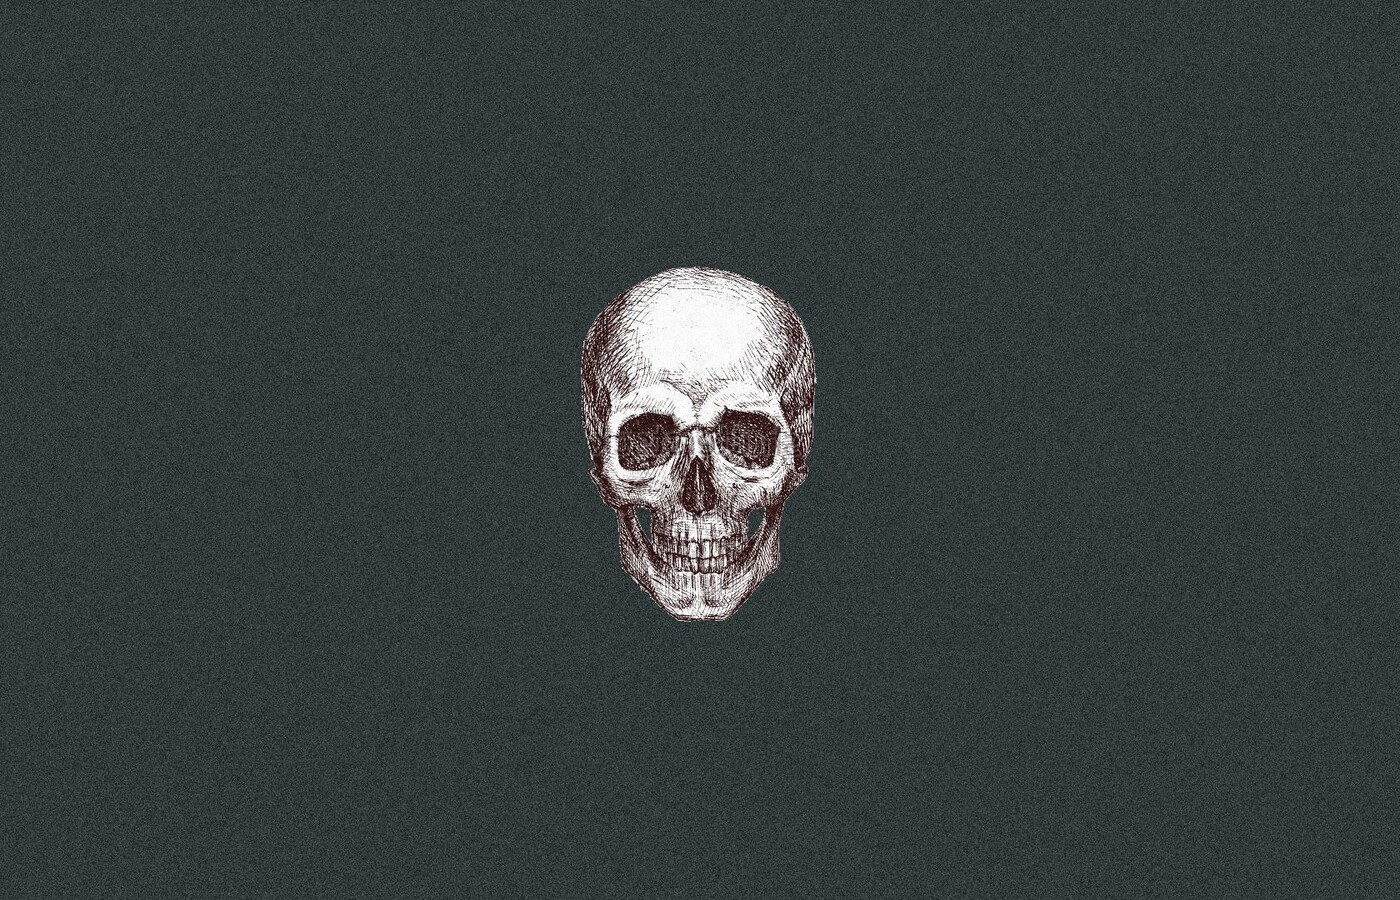 Skull Art 3 1400x900 Resolution HD 4k Wallpaper, Image, Background, Photo and Picture